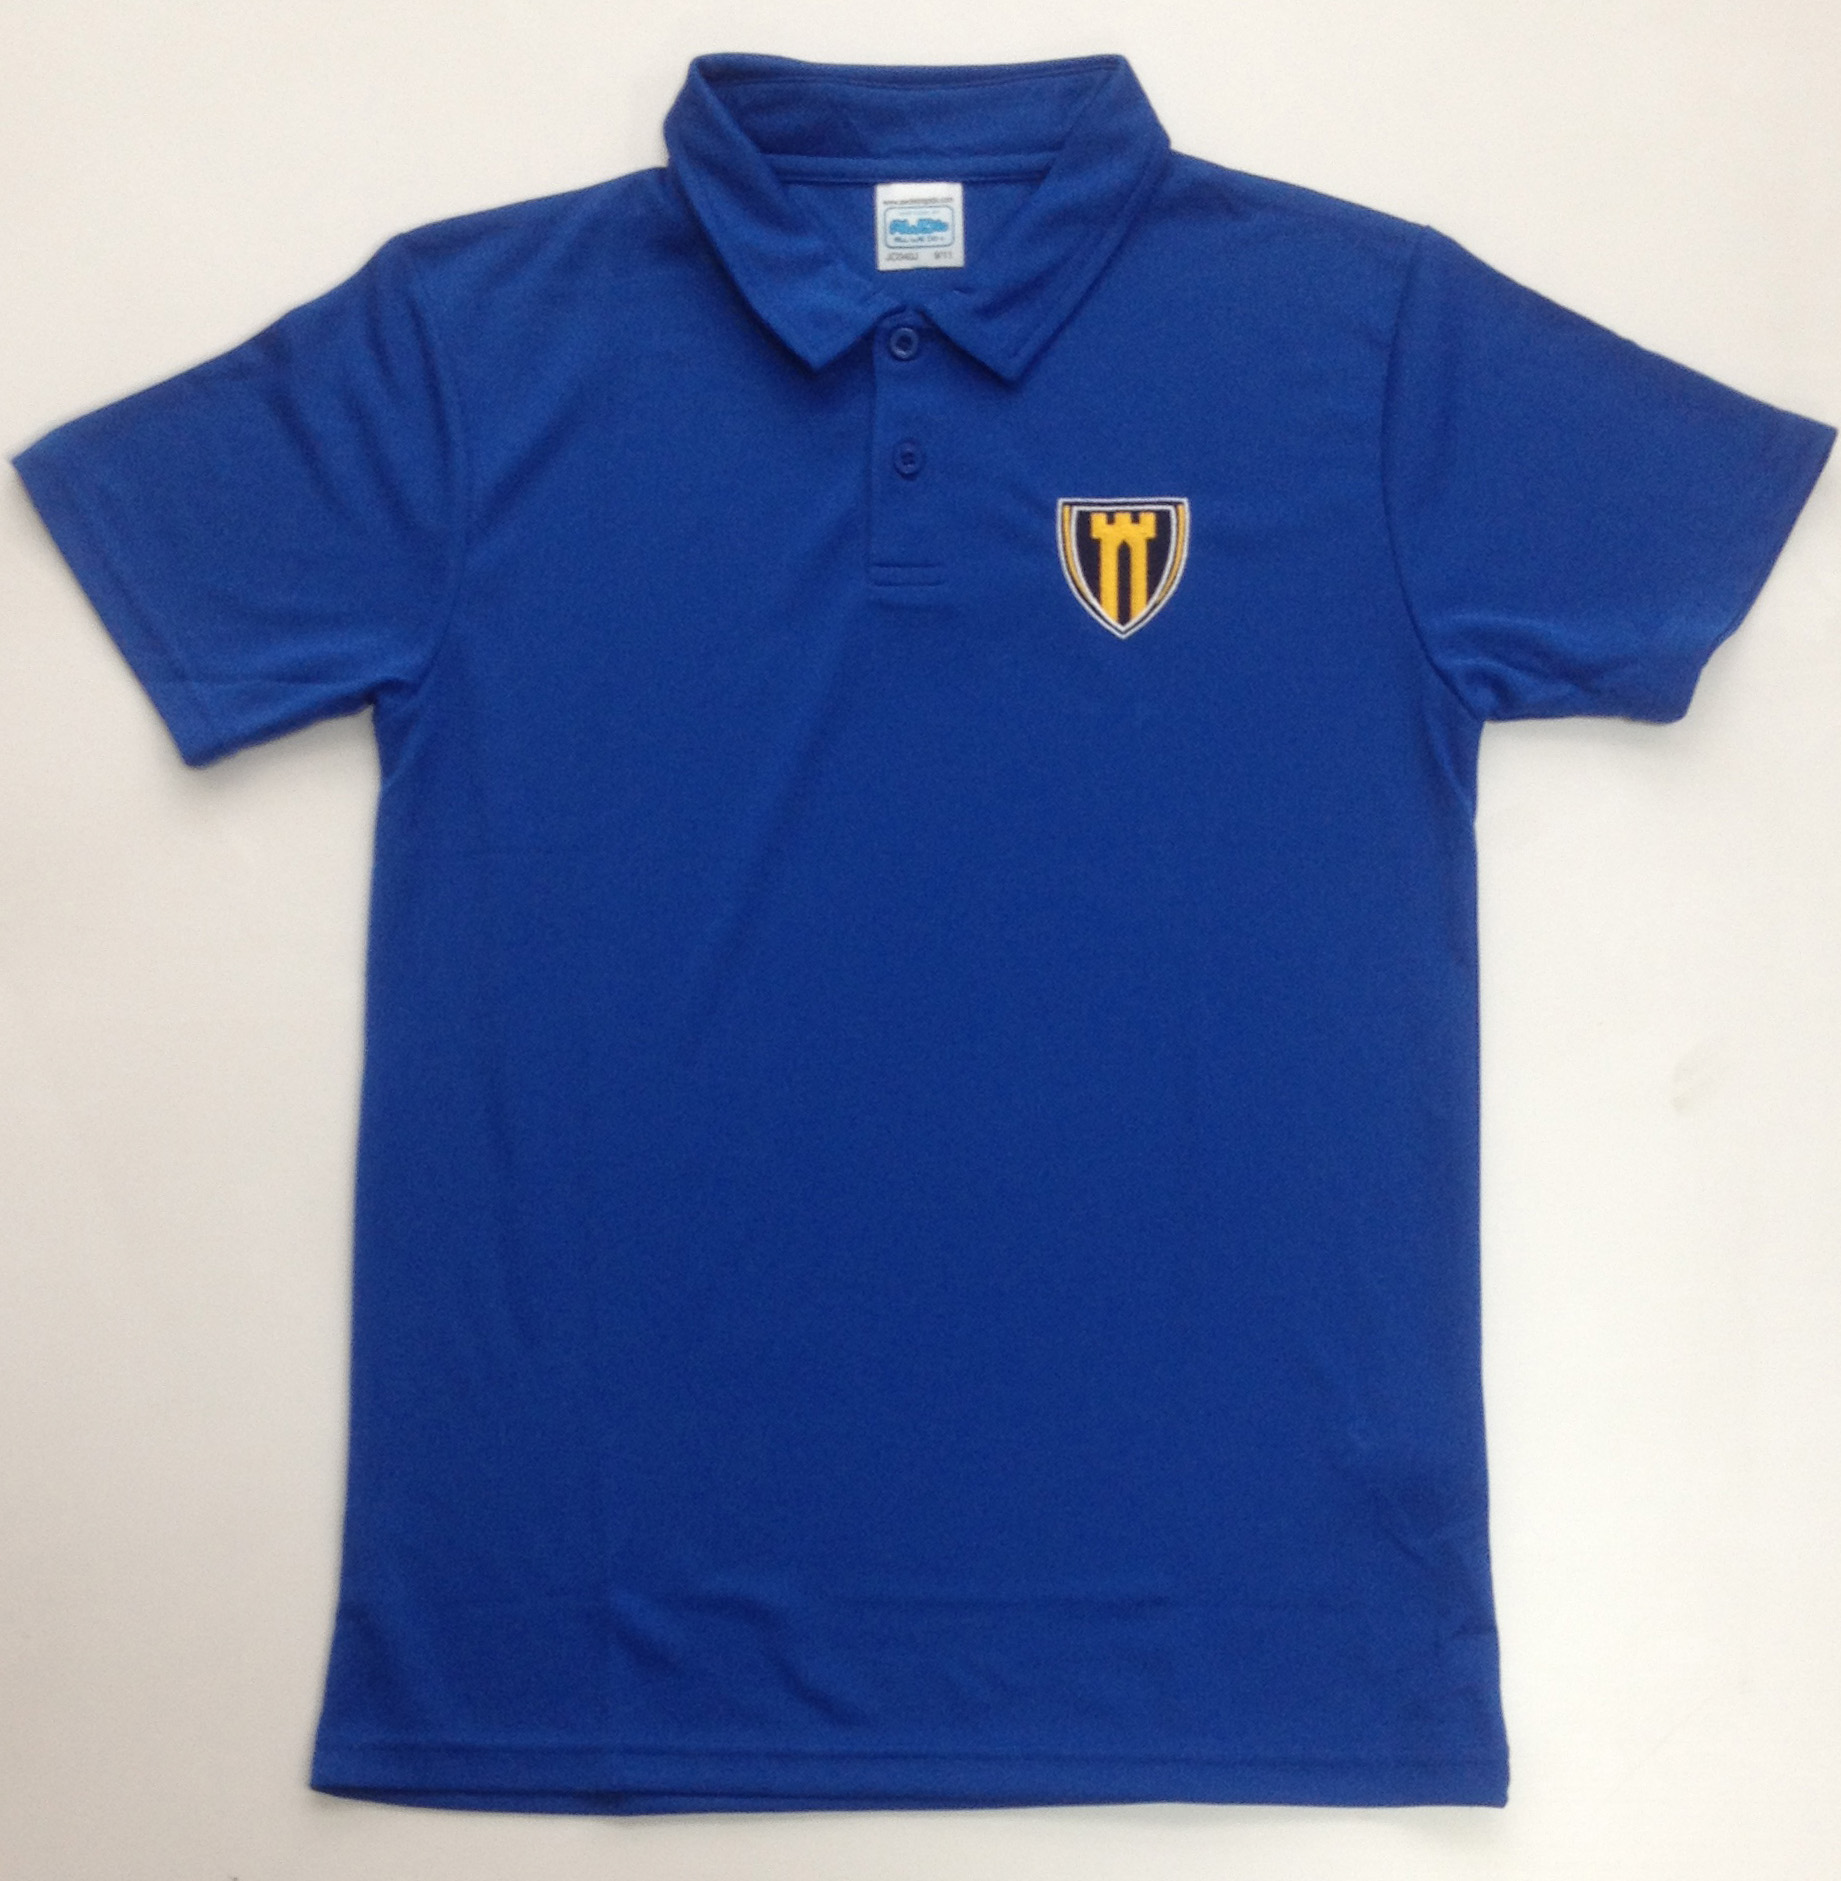 Castle Newnham Primary/Secondary Sports Top (Royal)